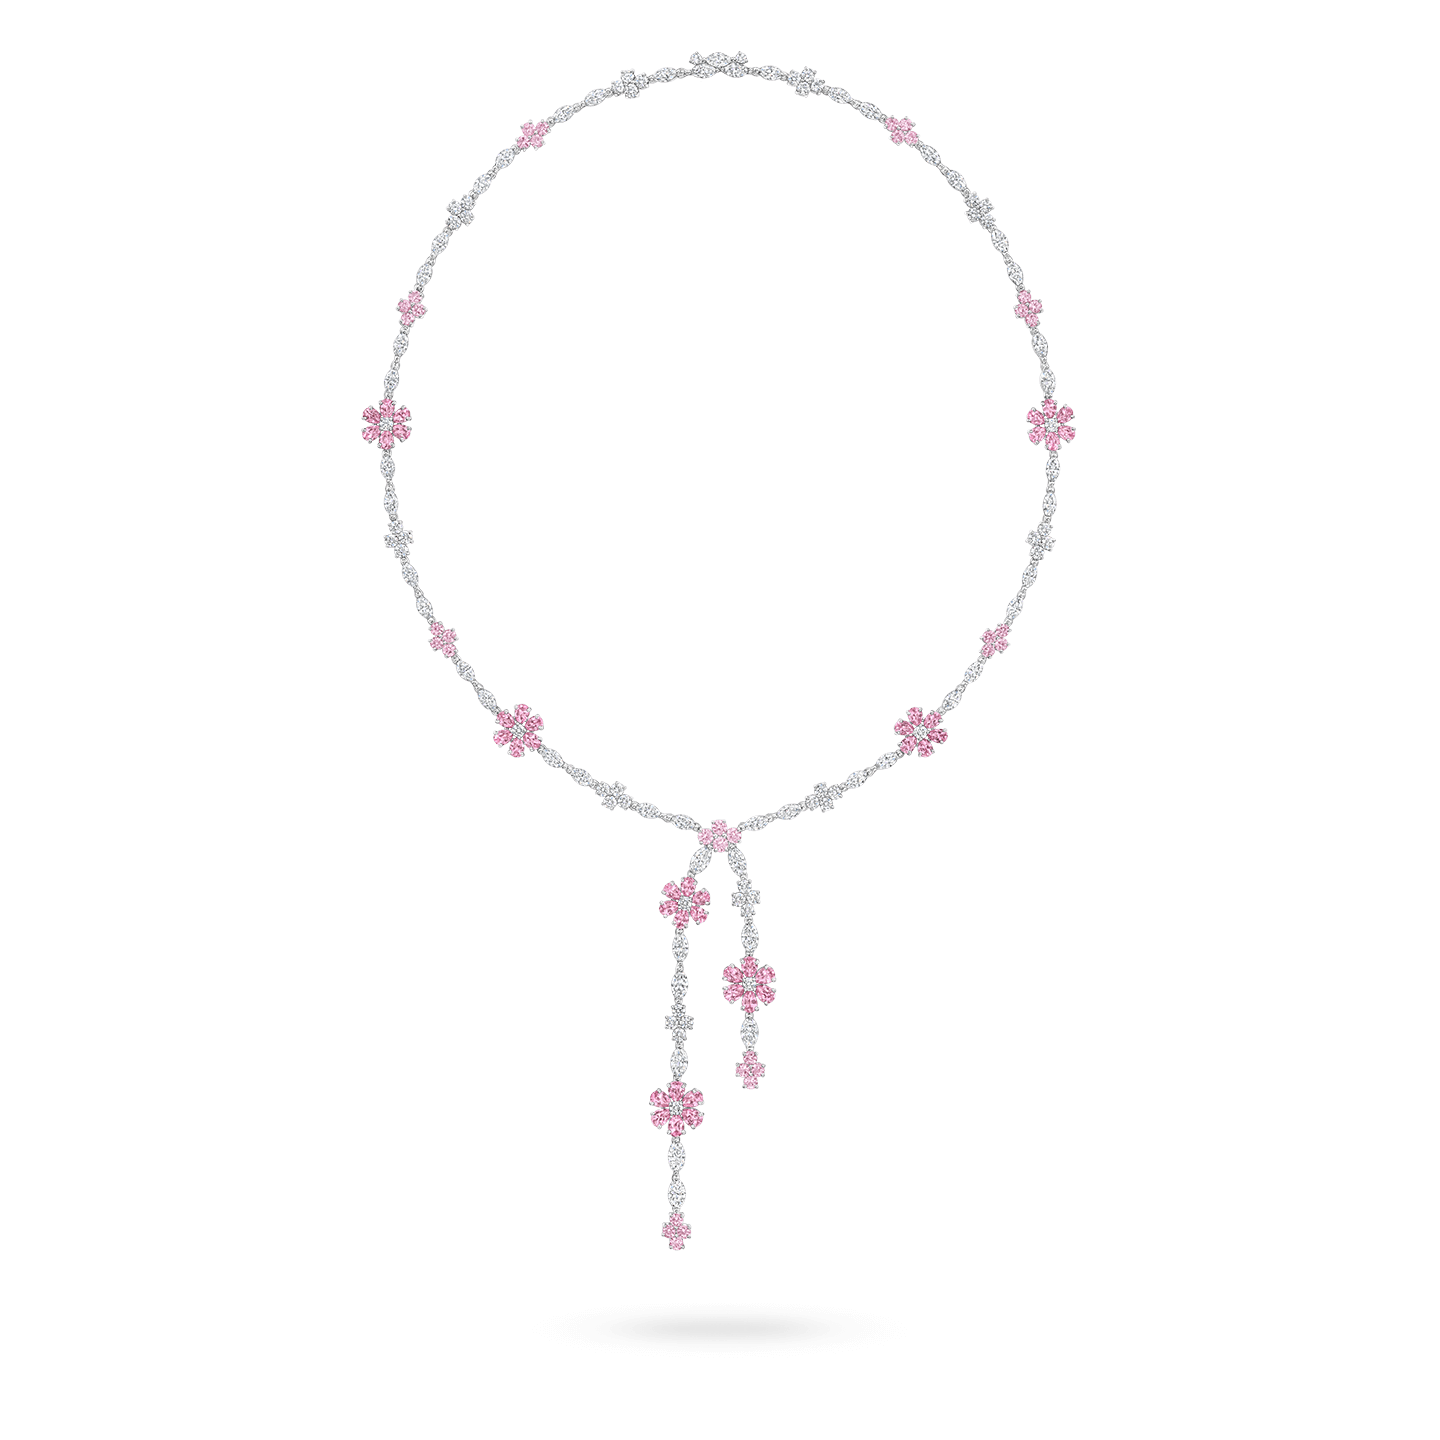 Louis Vuitton Pink Sapphire Limited Edition Necklace